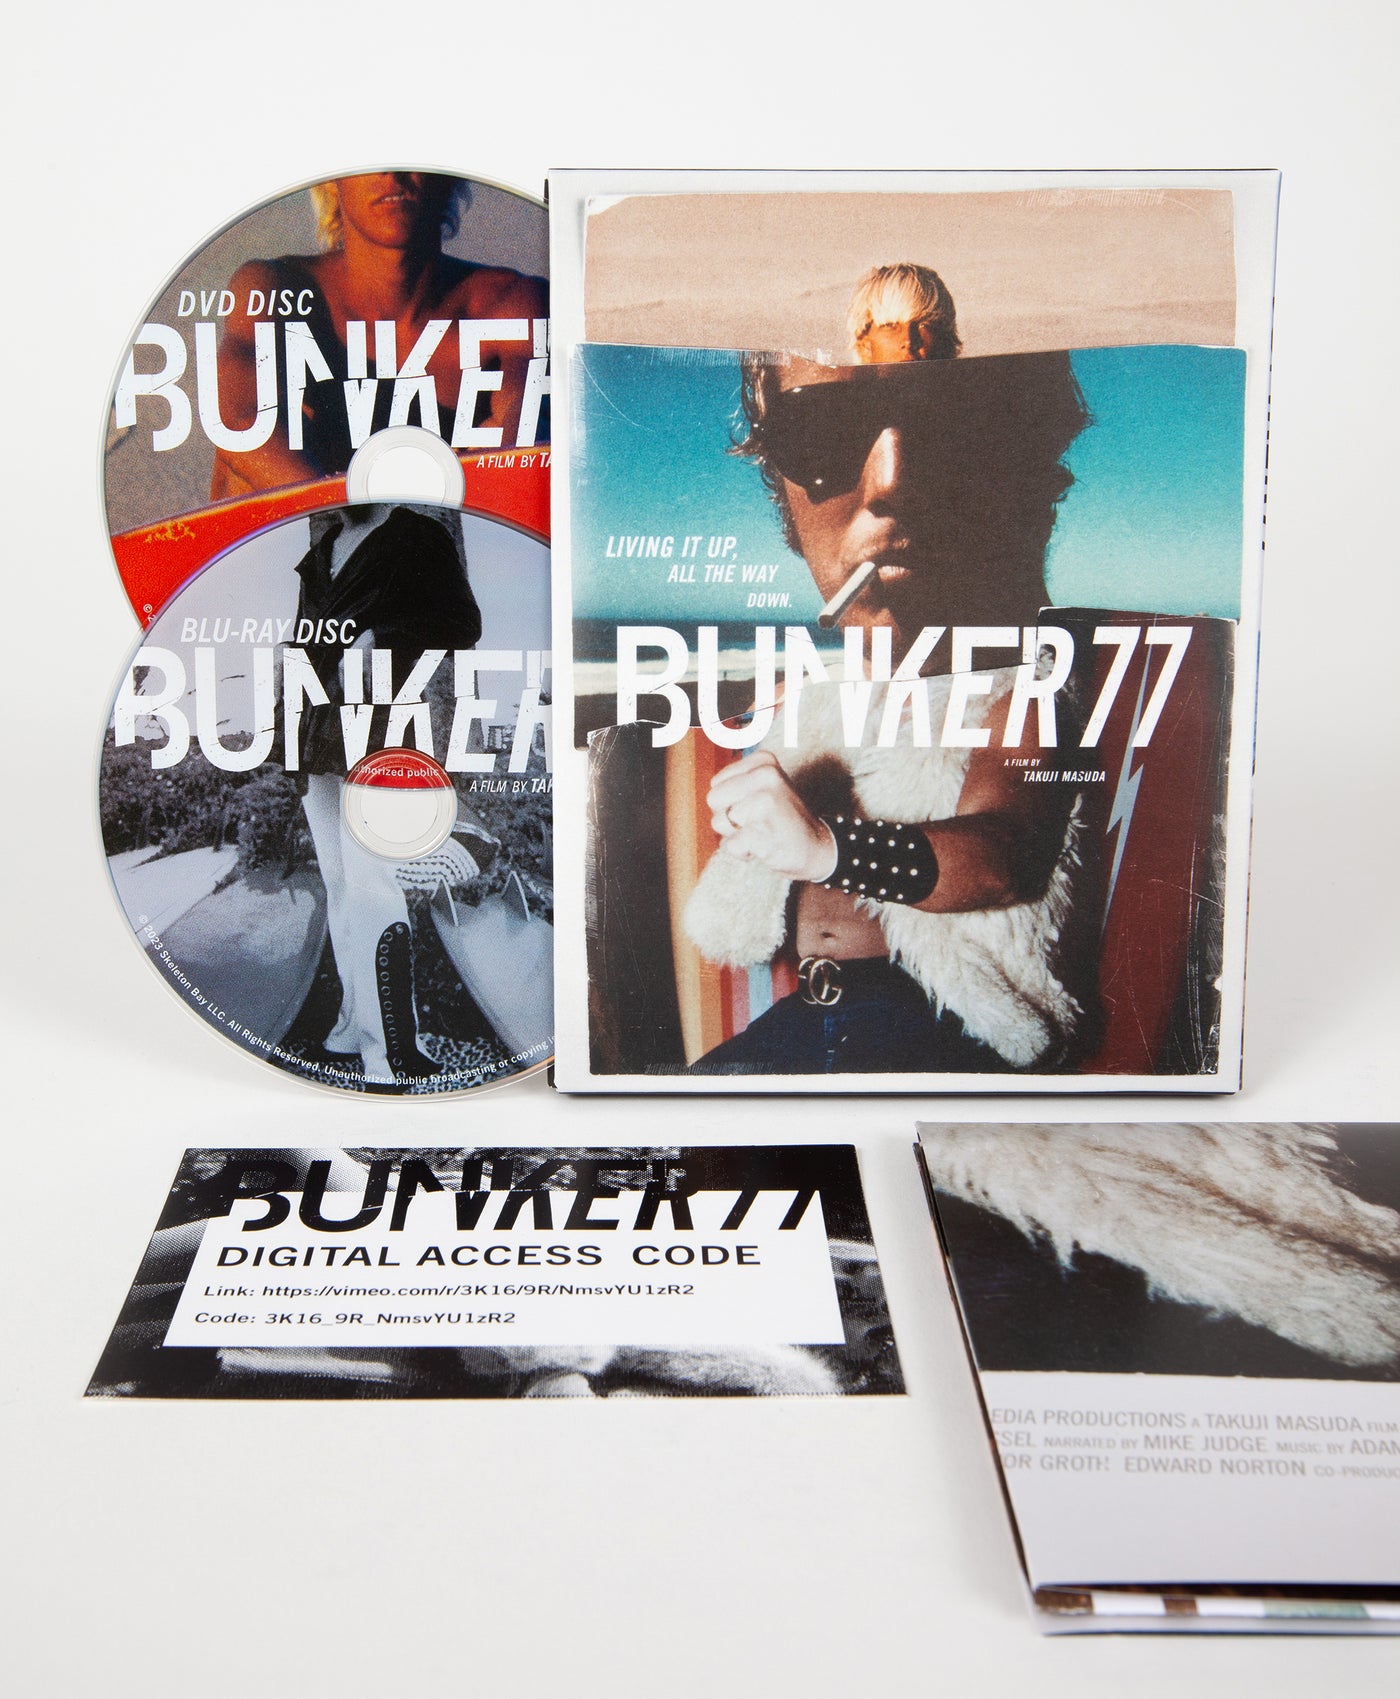 BUNKER77 (Limited Collector's Edition Digipak)